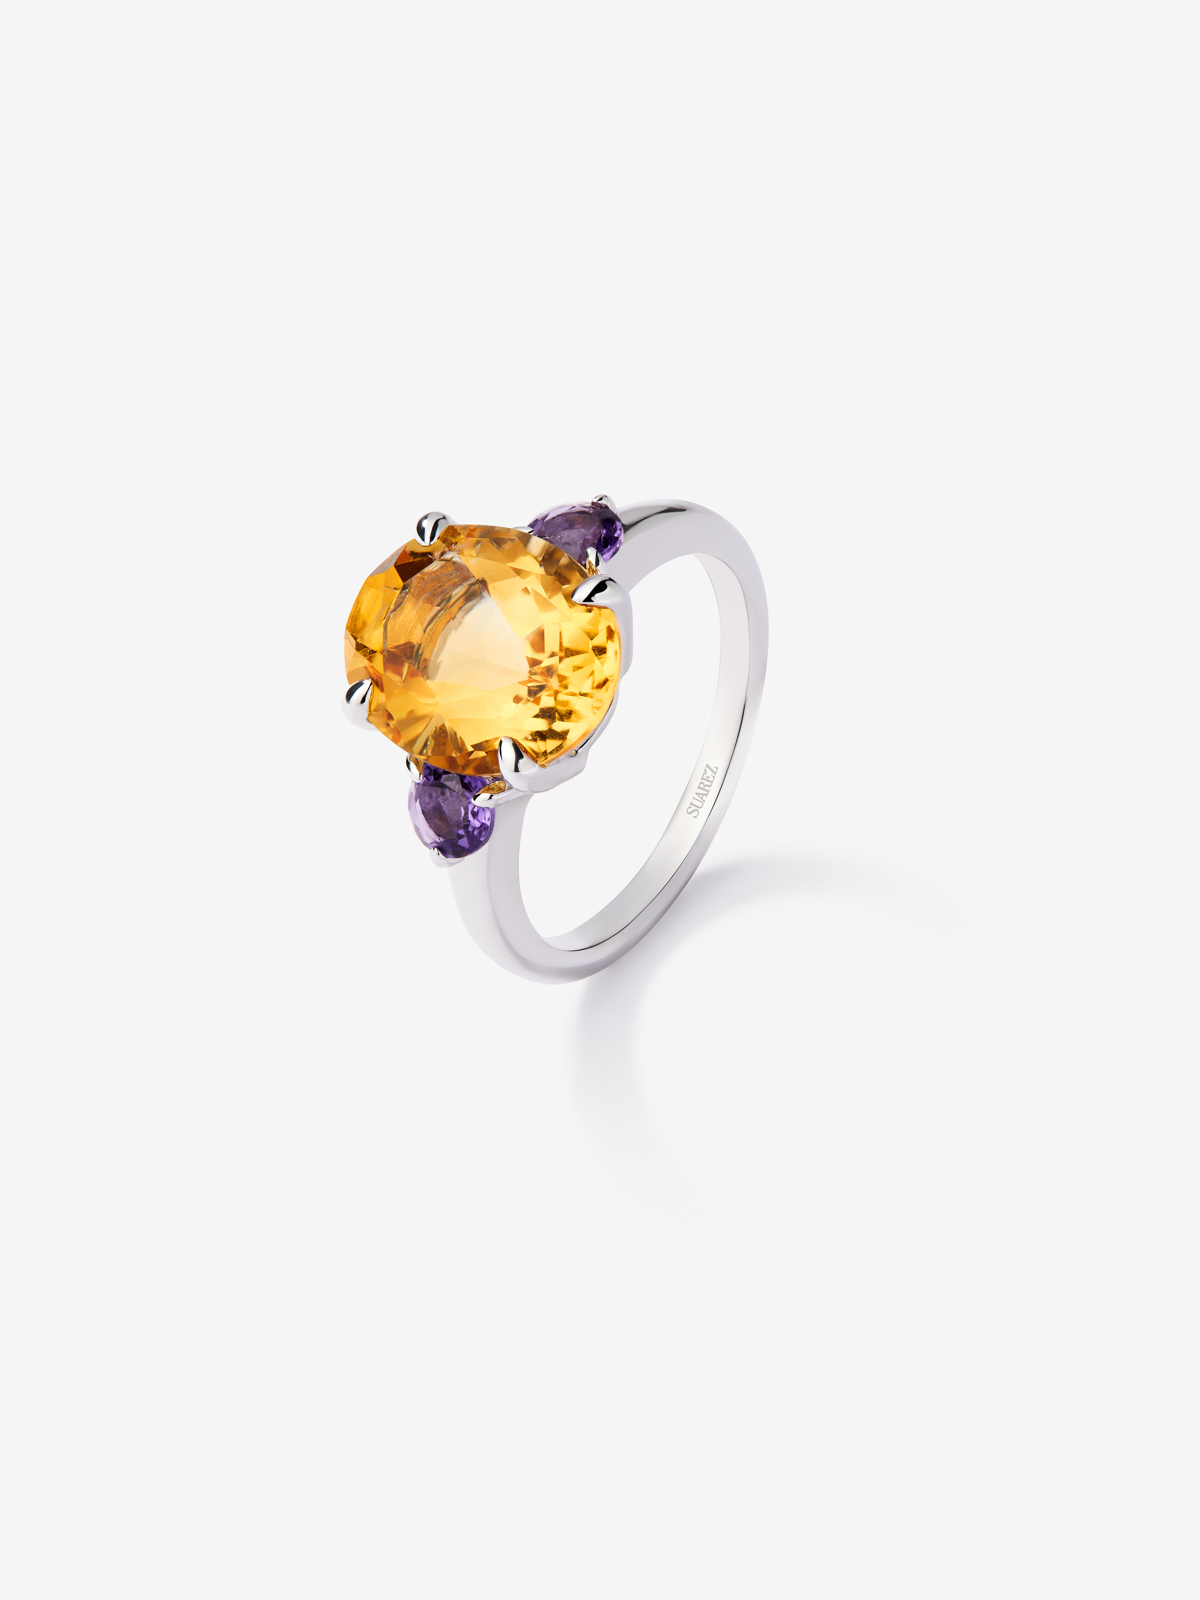 925 Silver Tiego Ring with Citrine Quartz in Oval Size 4.16 CTS and Amratists purple in bright size of 0.44 cts